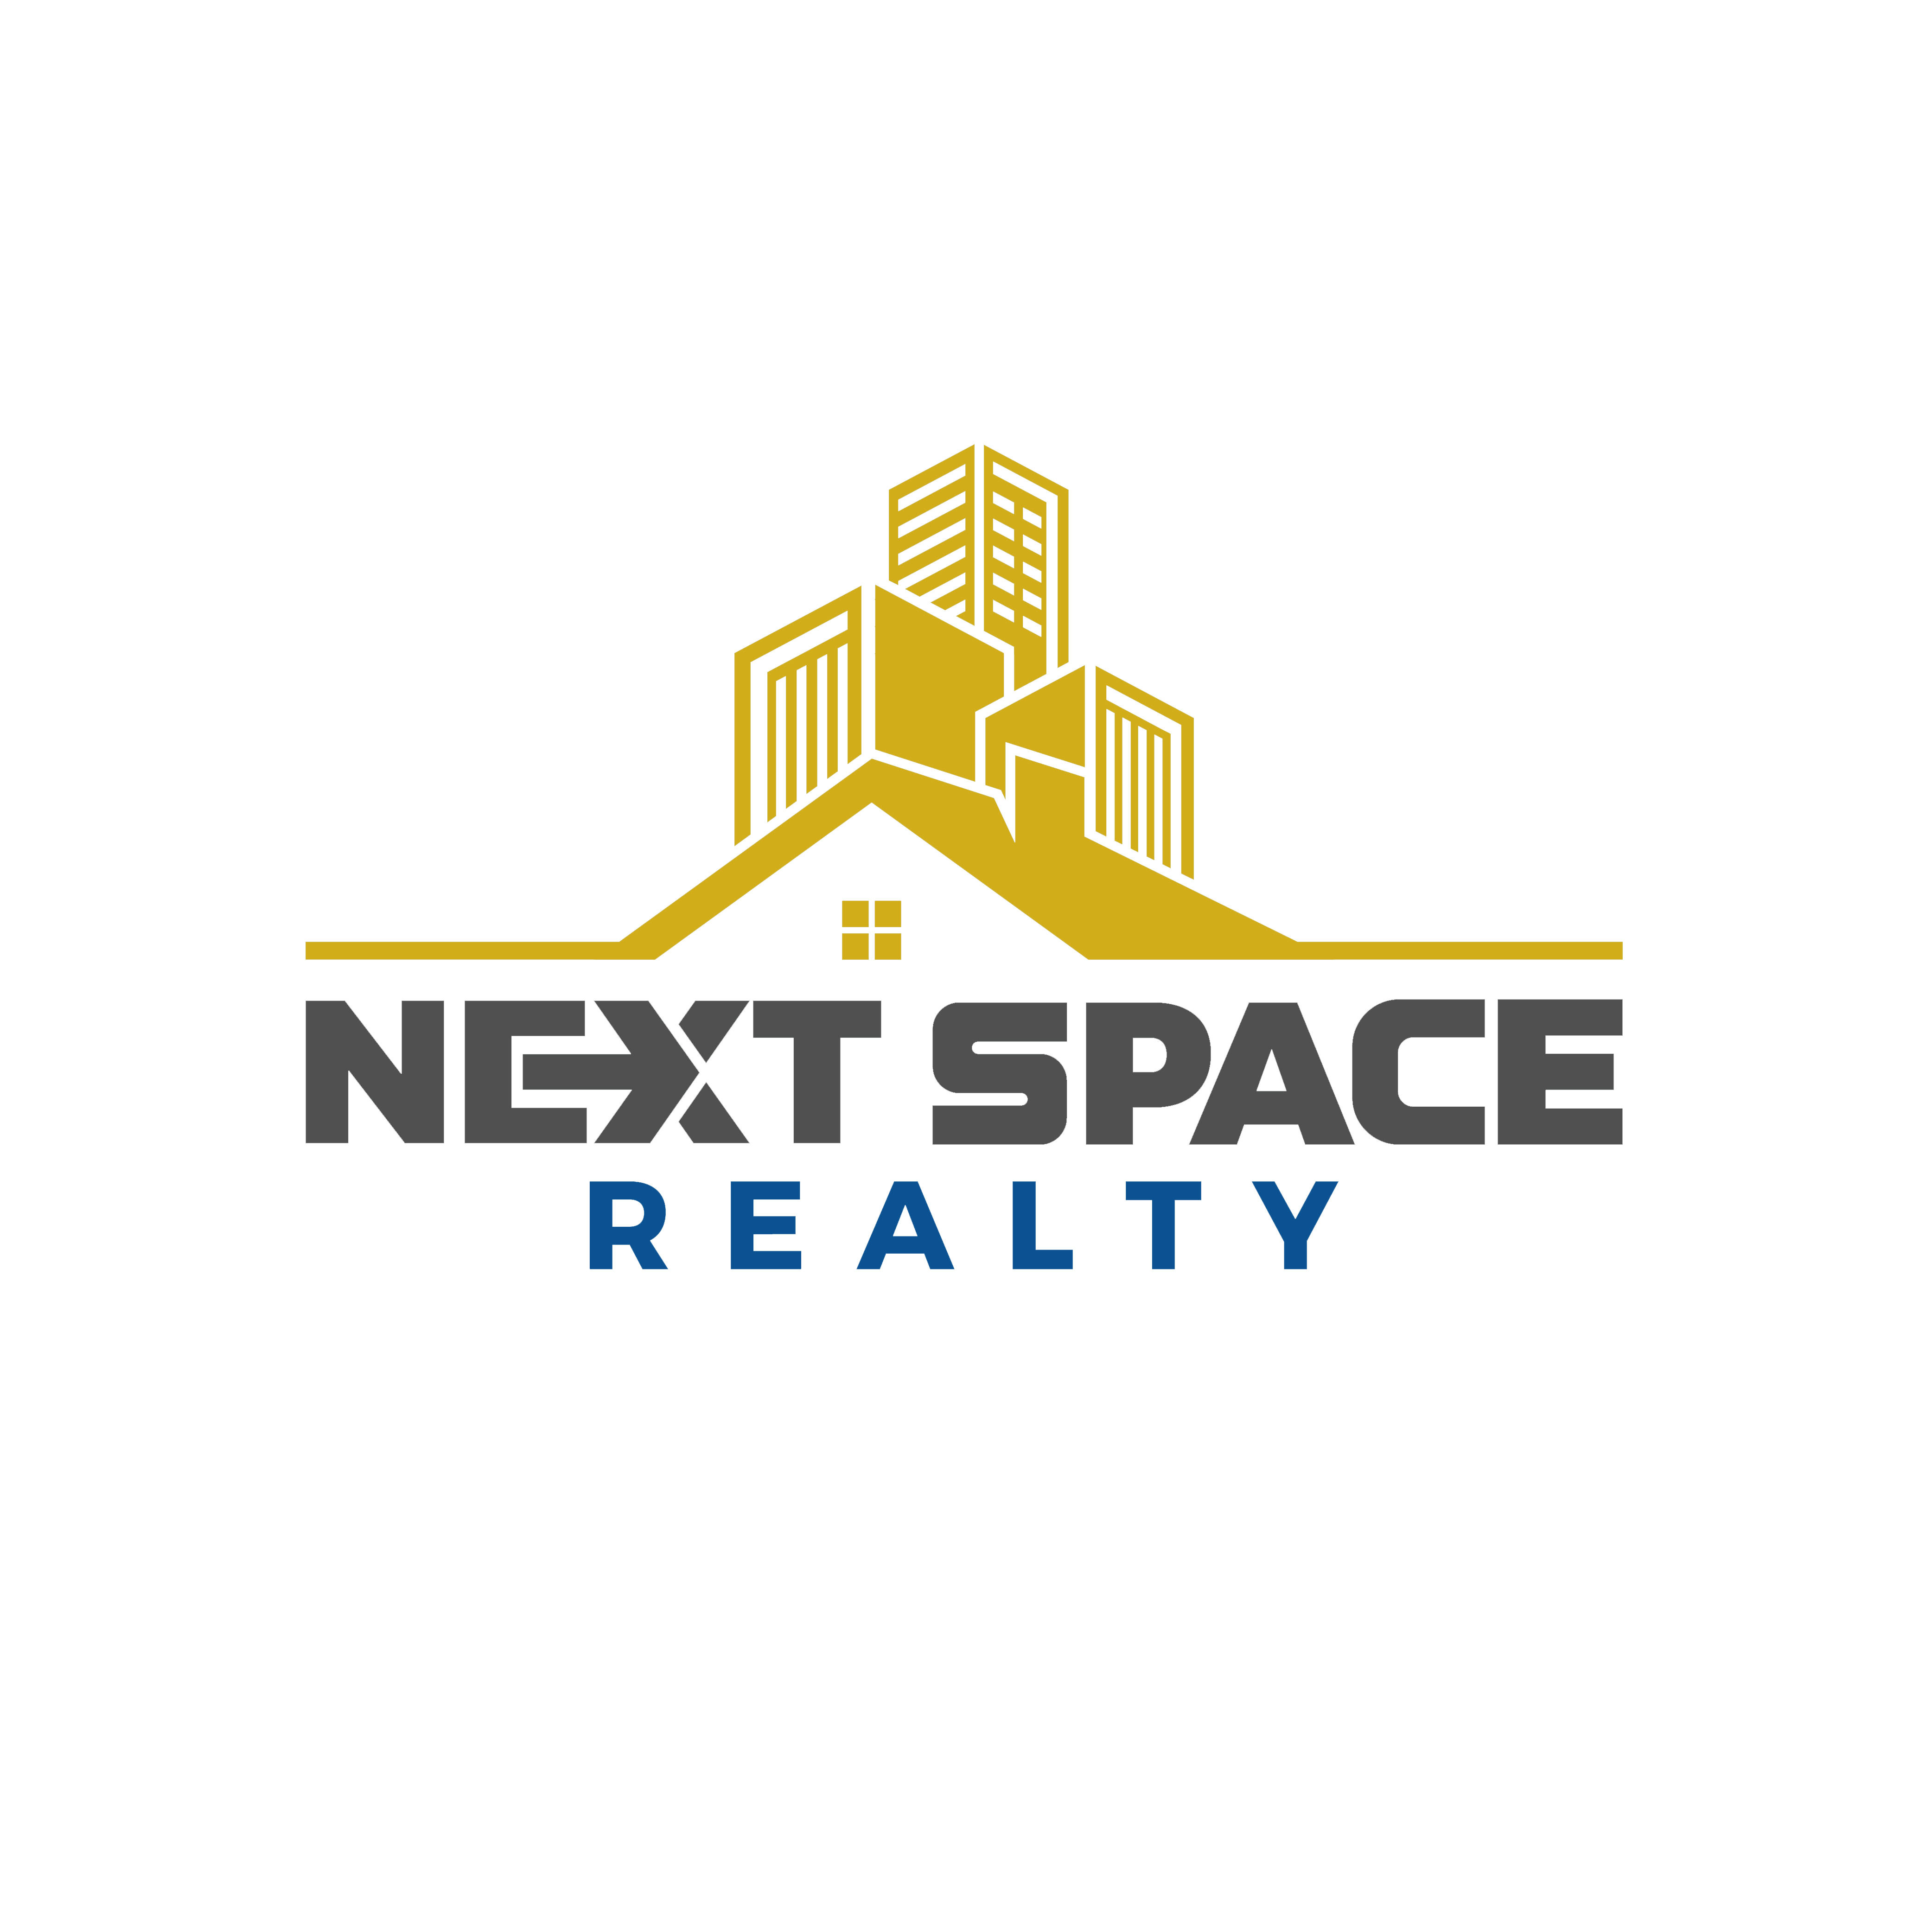 Next Space Realty